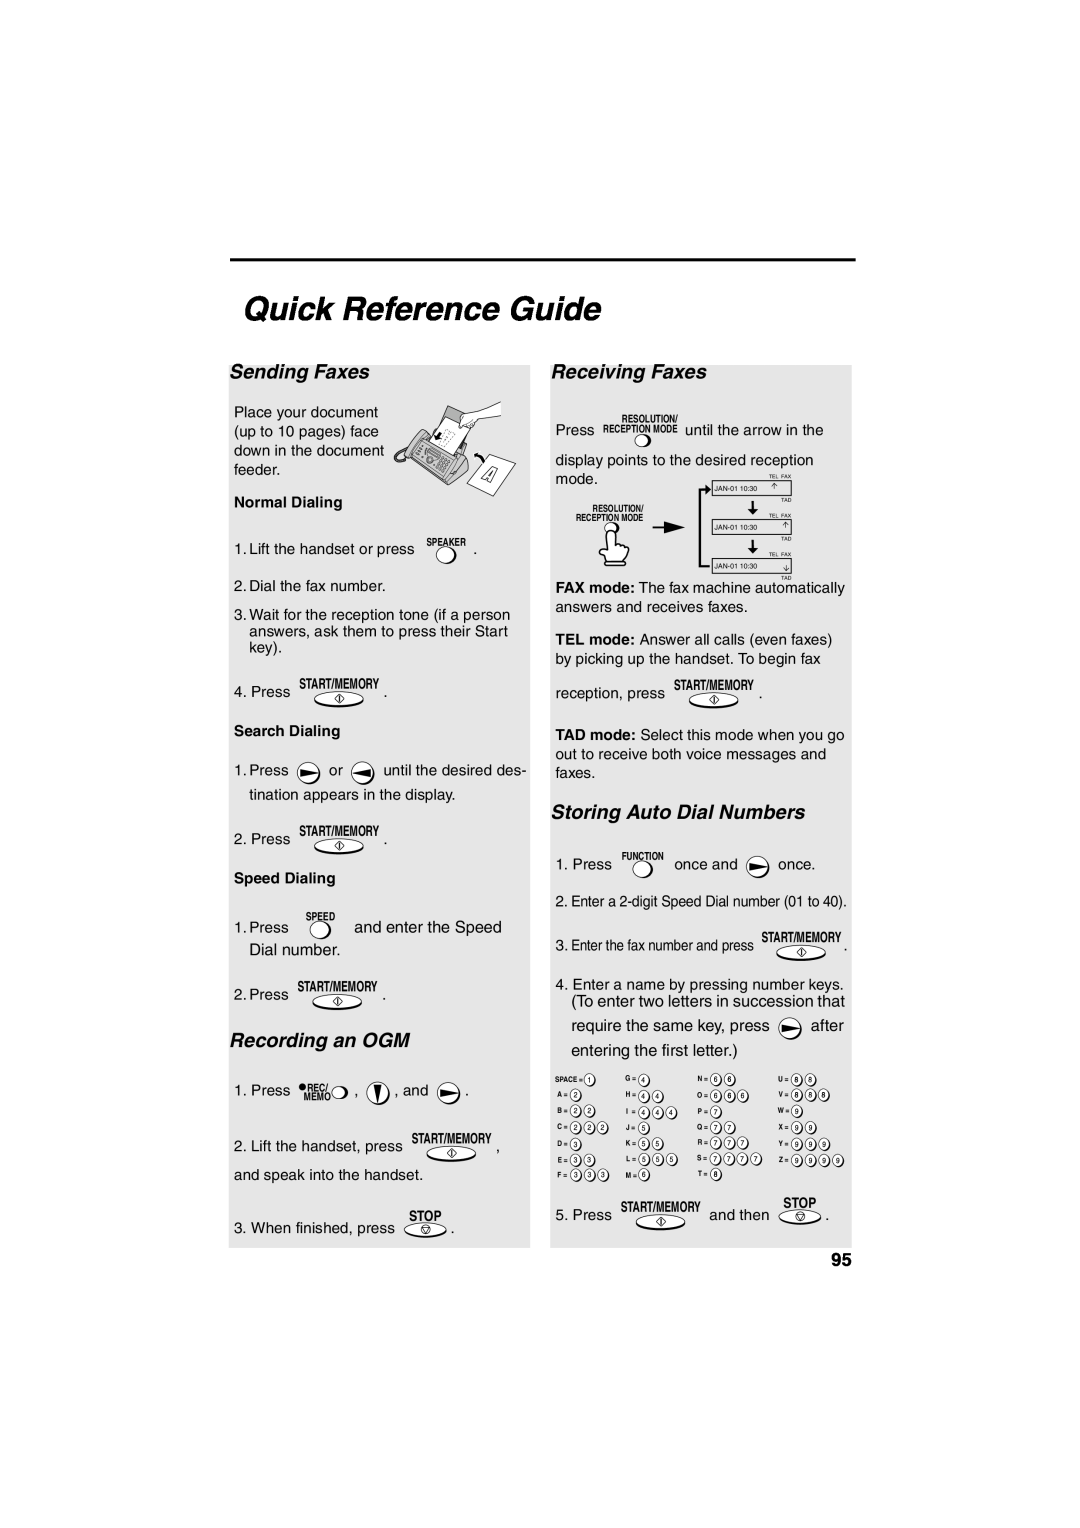 Sharp UX-A260 Quick Reference Guide, Sending Faxes, Recording an OGM, Receiving Faxes, Normal Dialing, Press START/MEMORY 